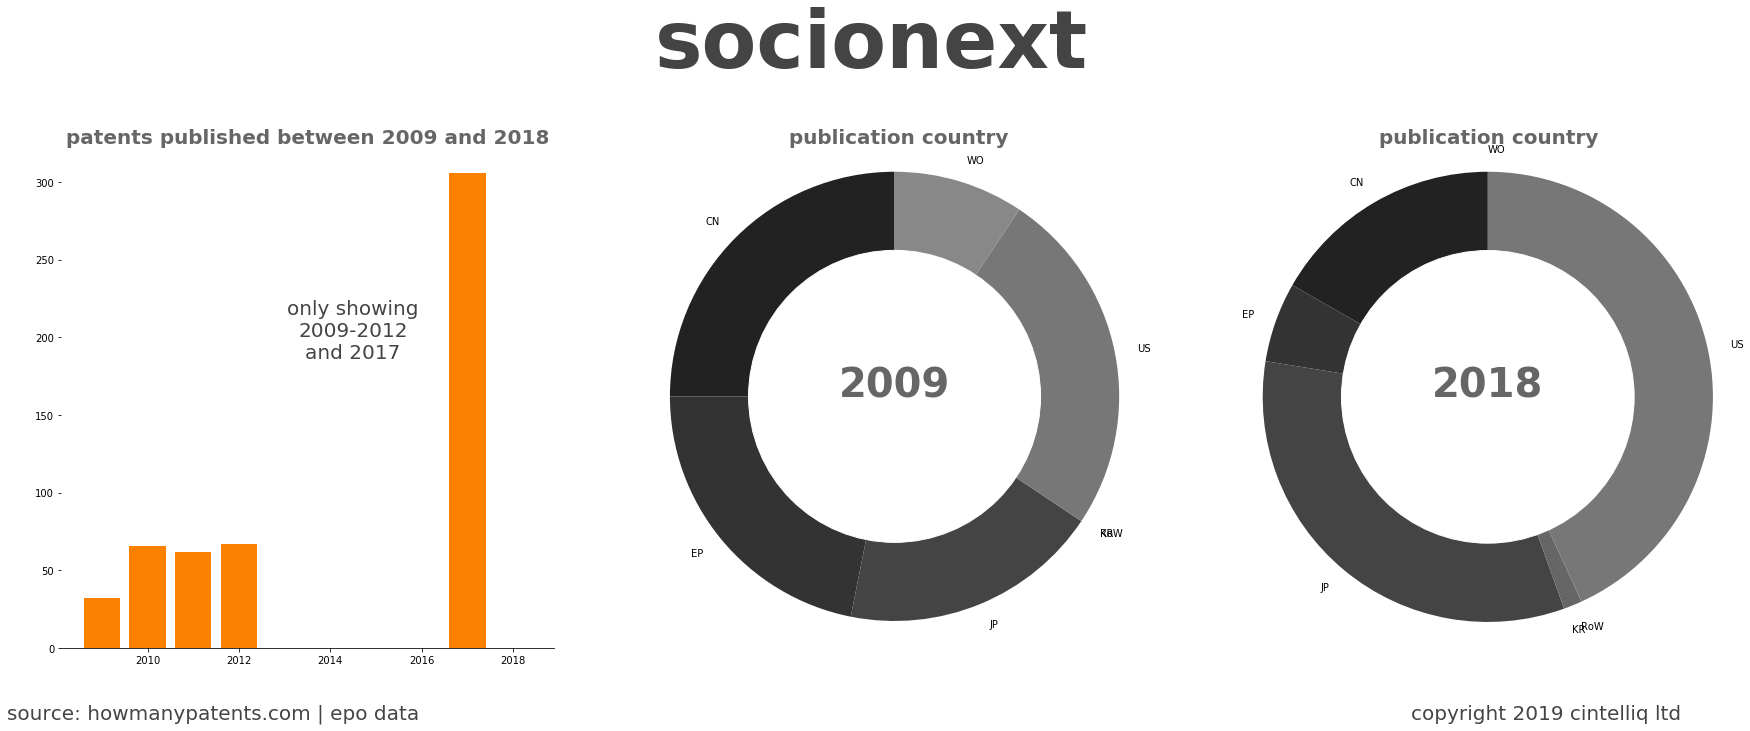 summary of patents for Socionext